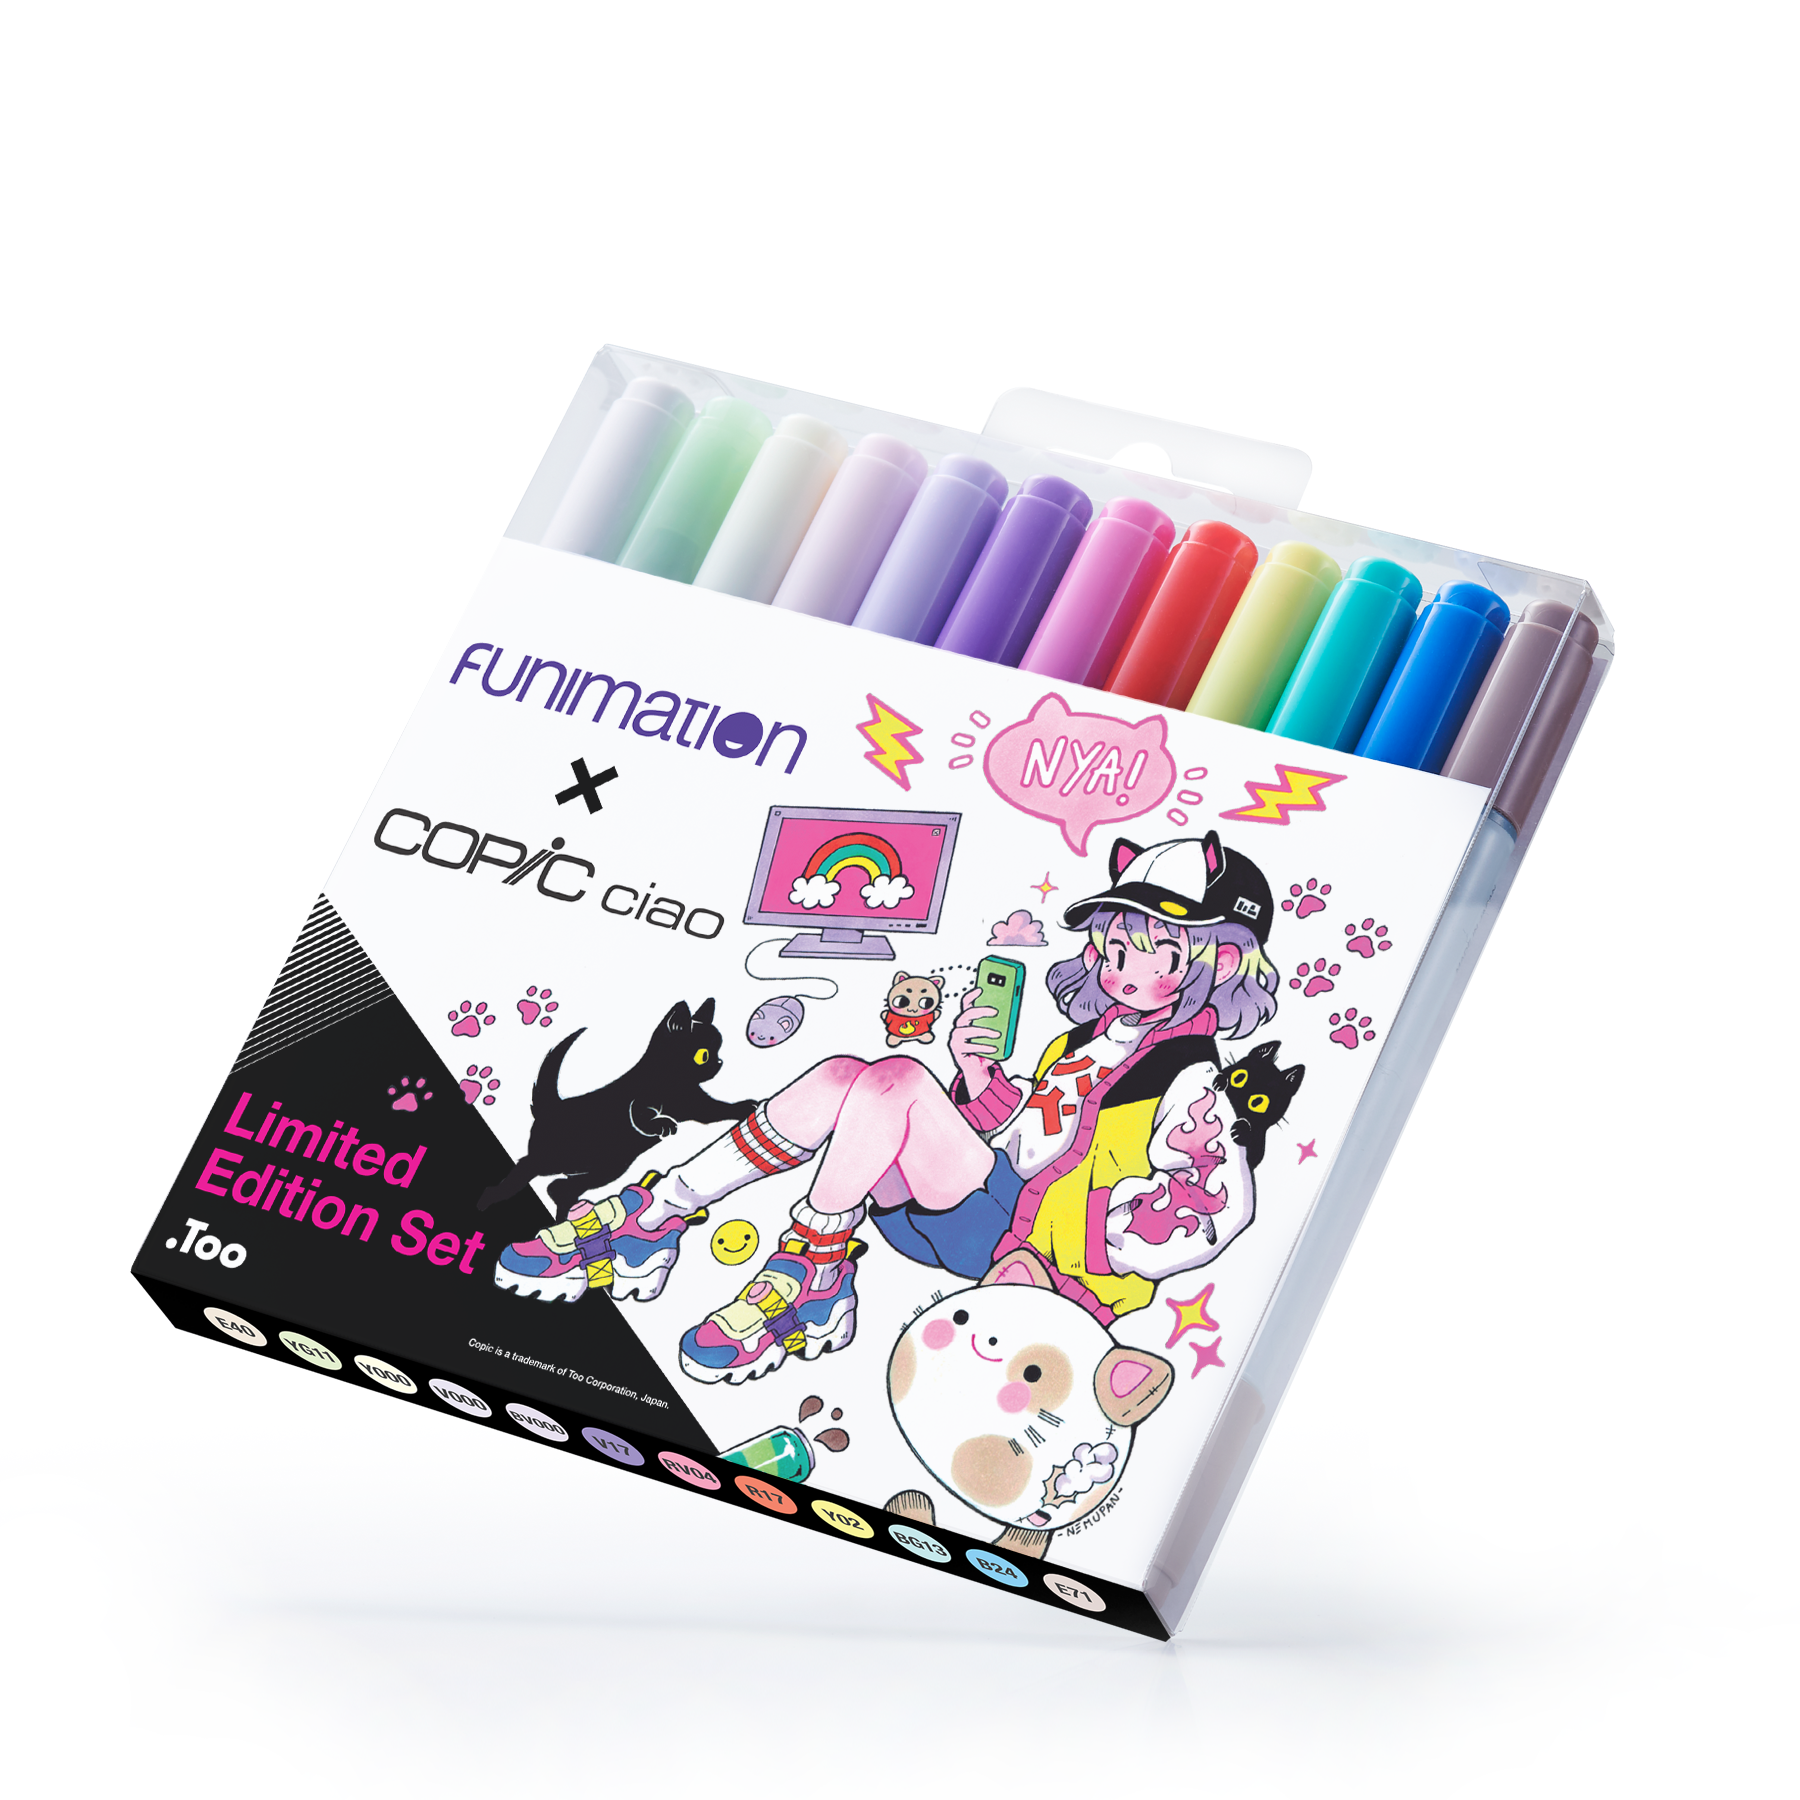 Copic Ciao x Funimation Marker Set